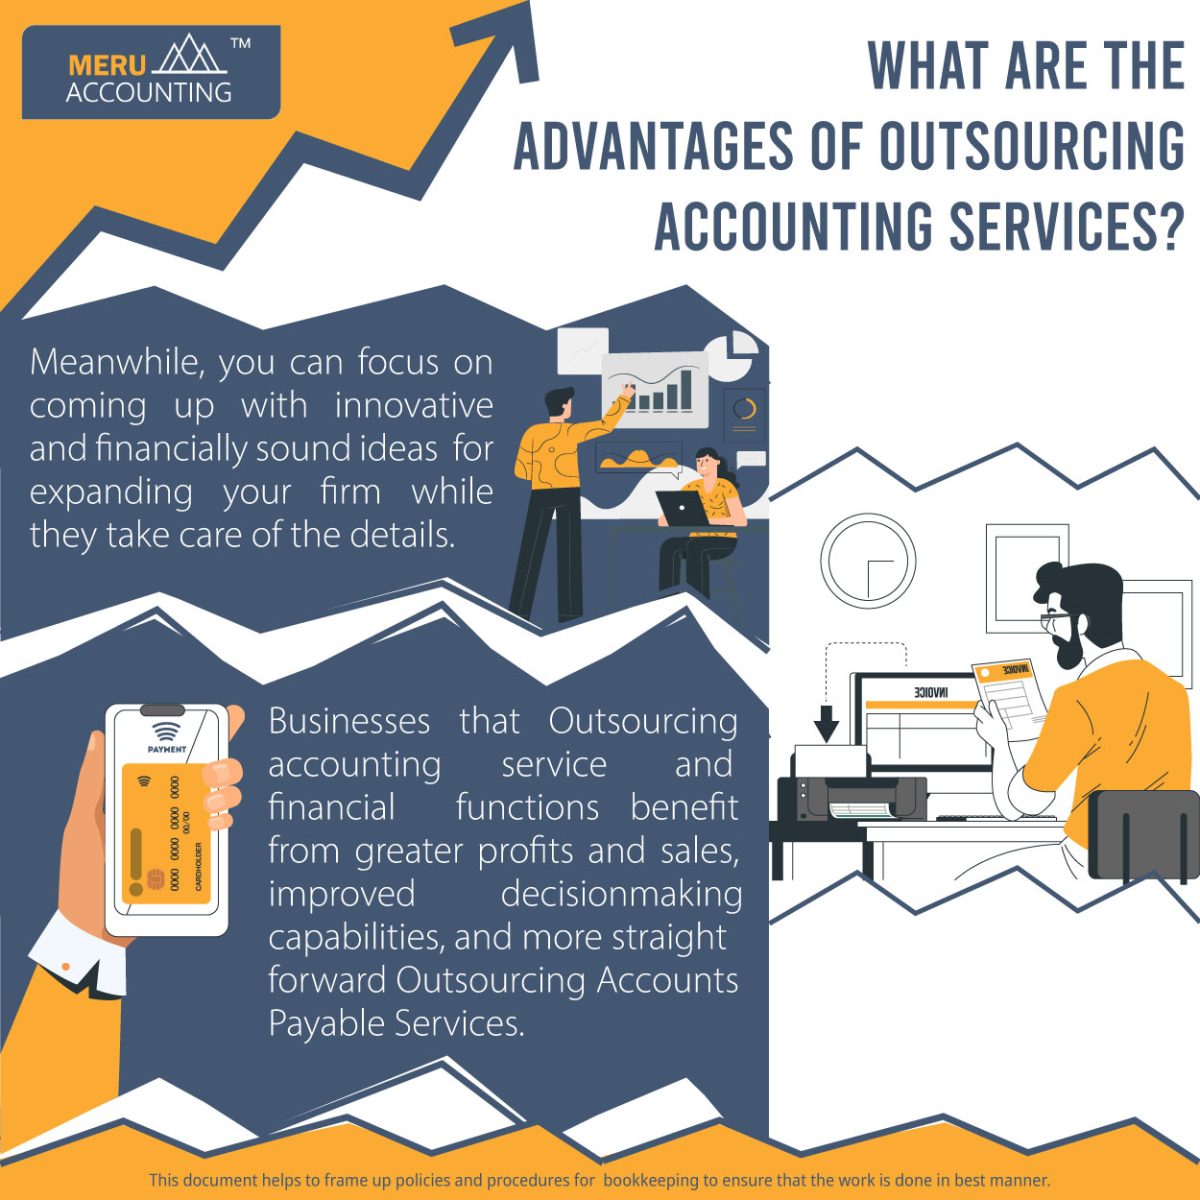 What are the advantages of outsourcing accounting services?